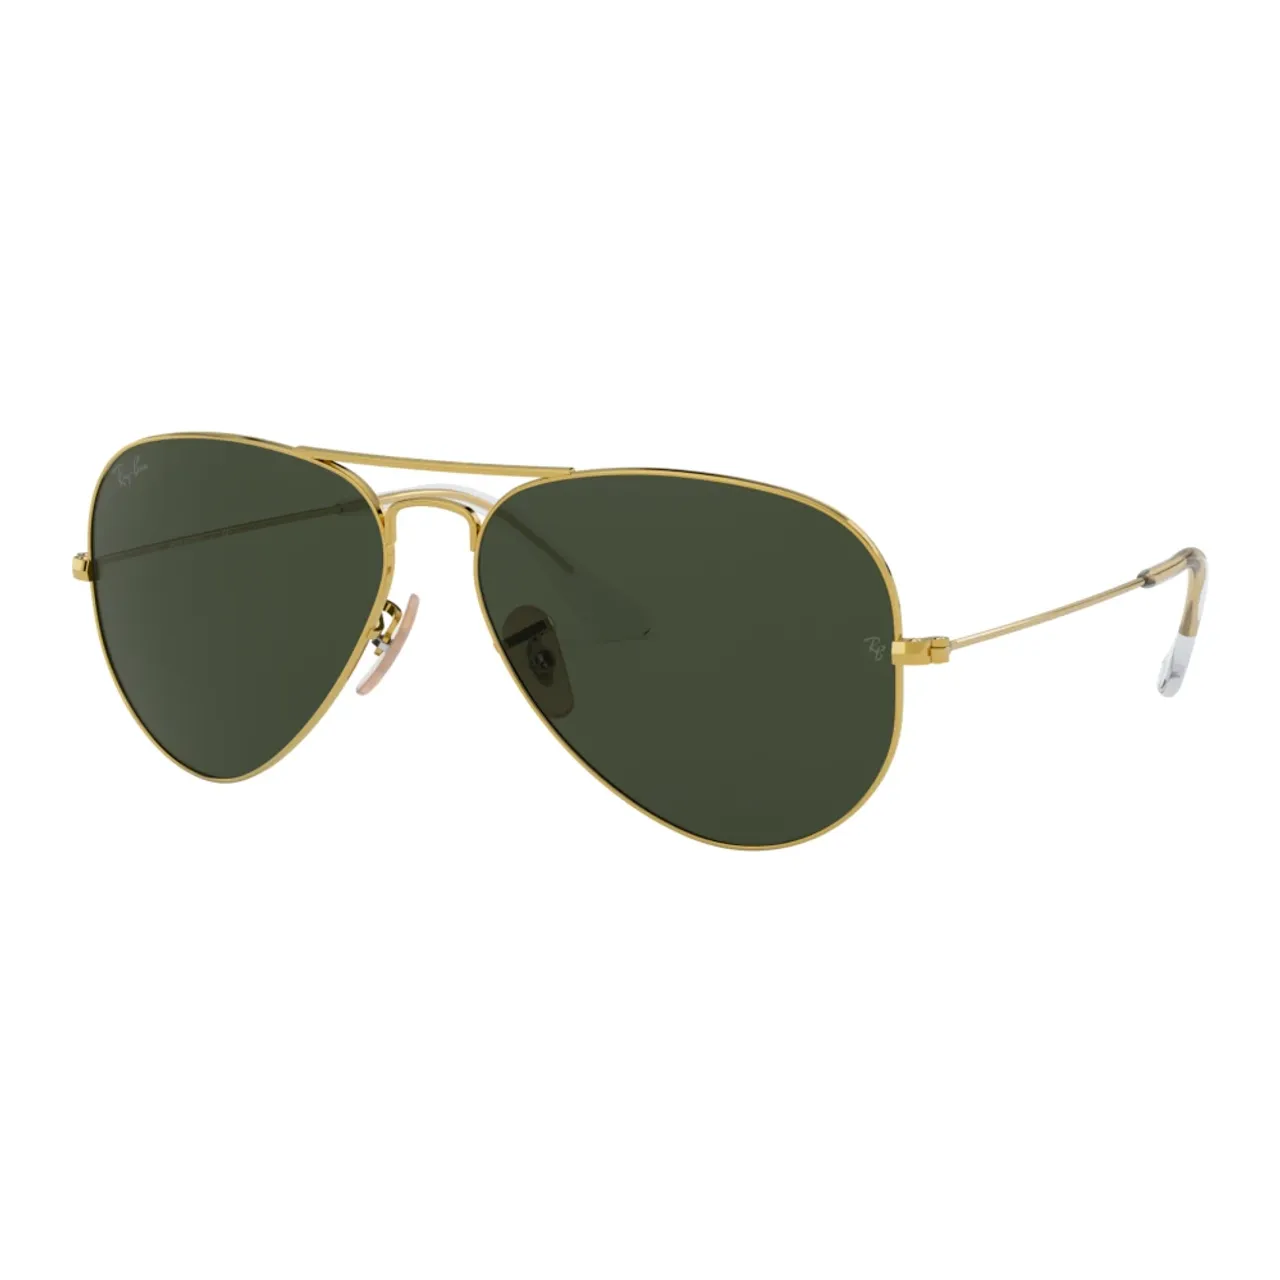 Ray-Ban , Rb3025 Aviator | Aviation Collection Polarized Sunglasses ,Yellow female, Sizes: